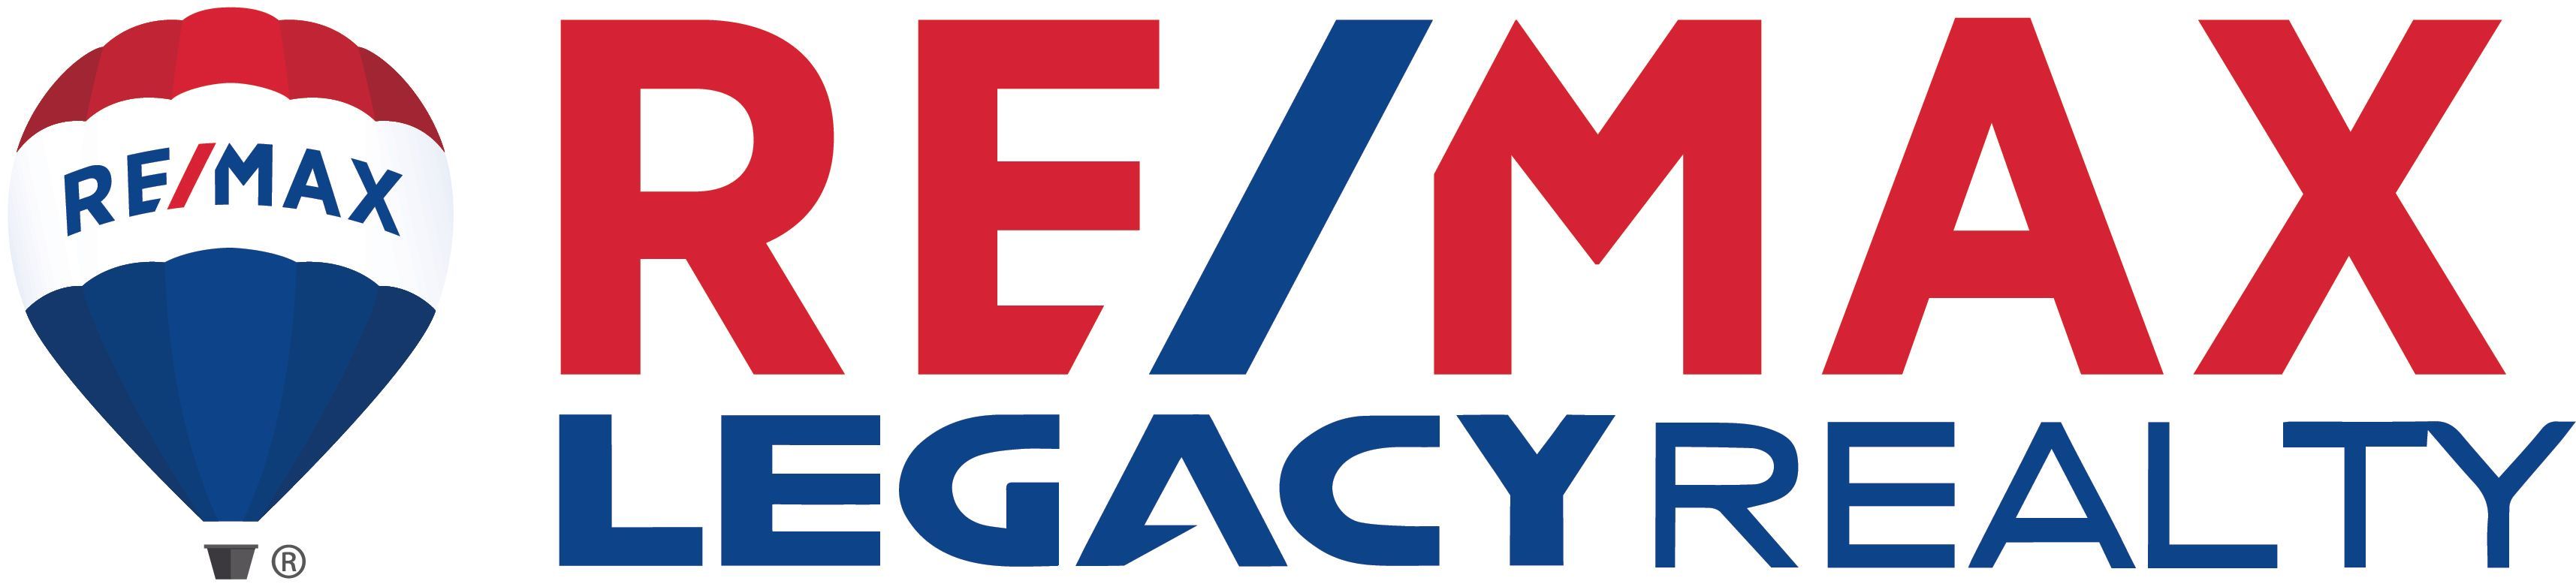 RE/MAX Legacy Realty